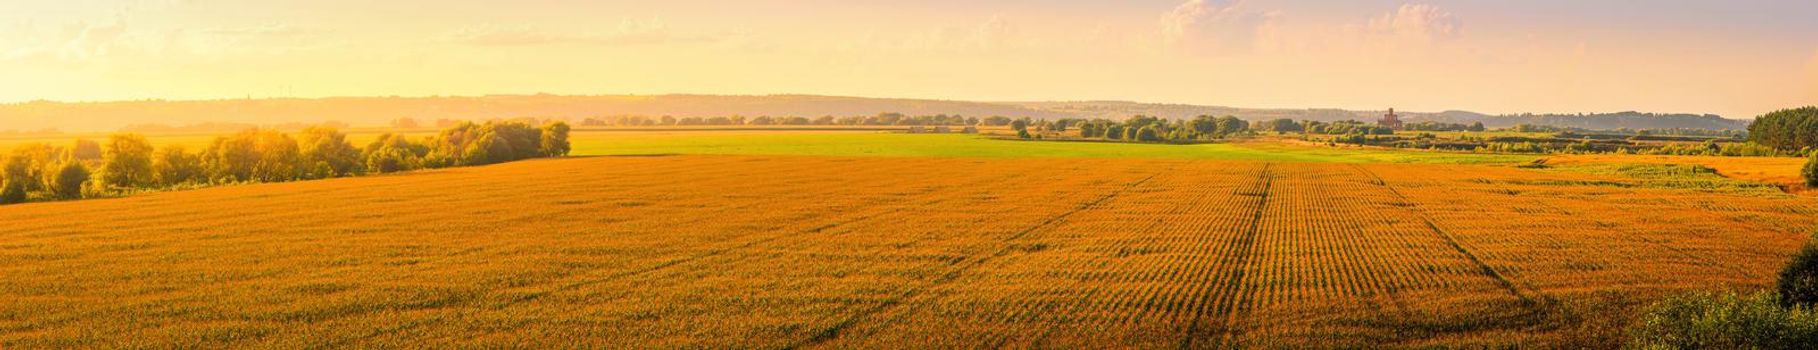 Top view to the rows of young corn in an agricultural field at sunset or sunrise. Rural panorama.